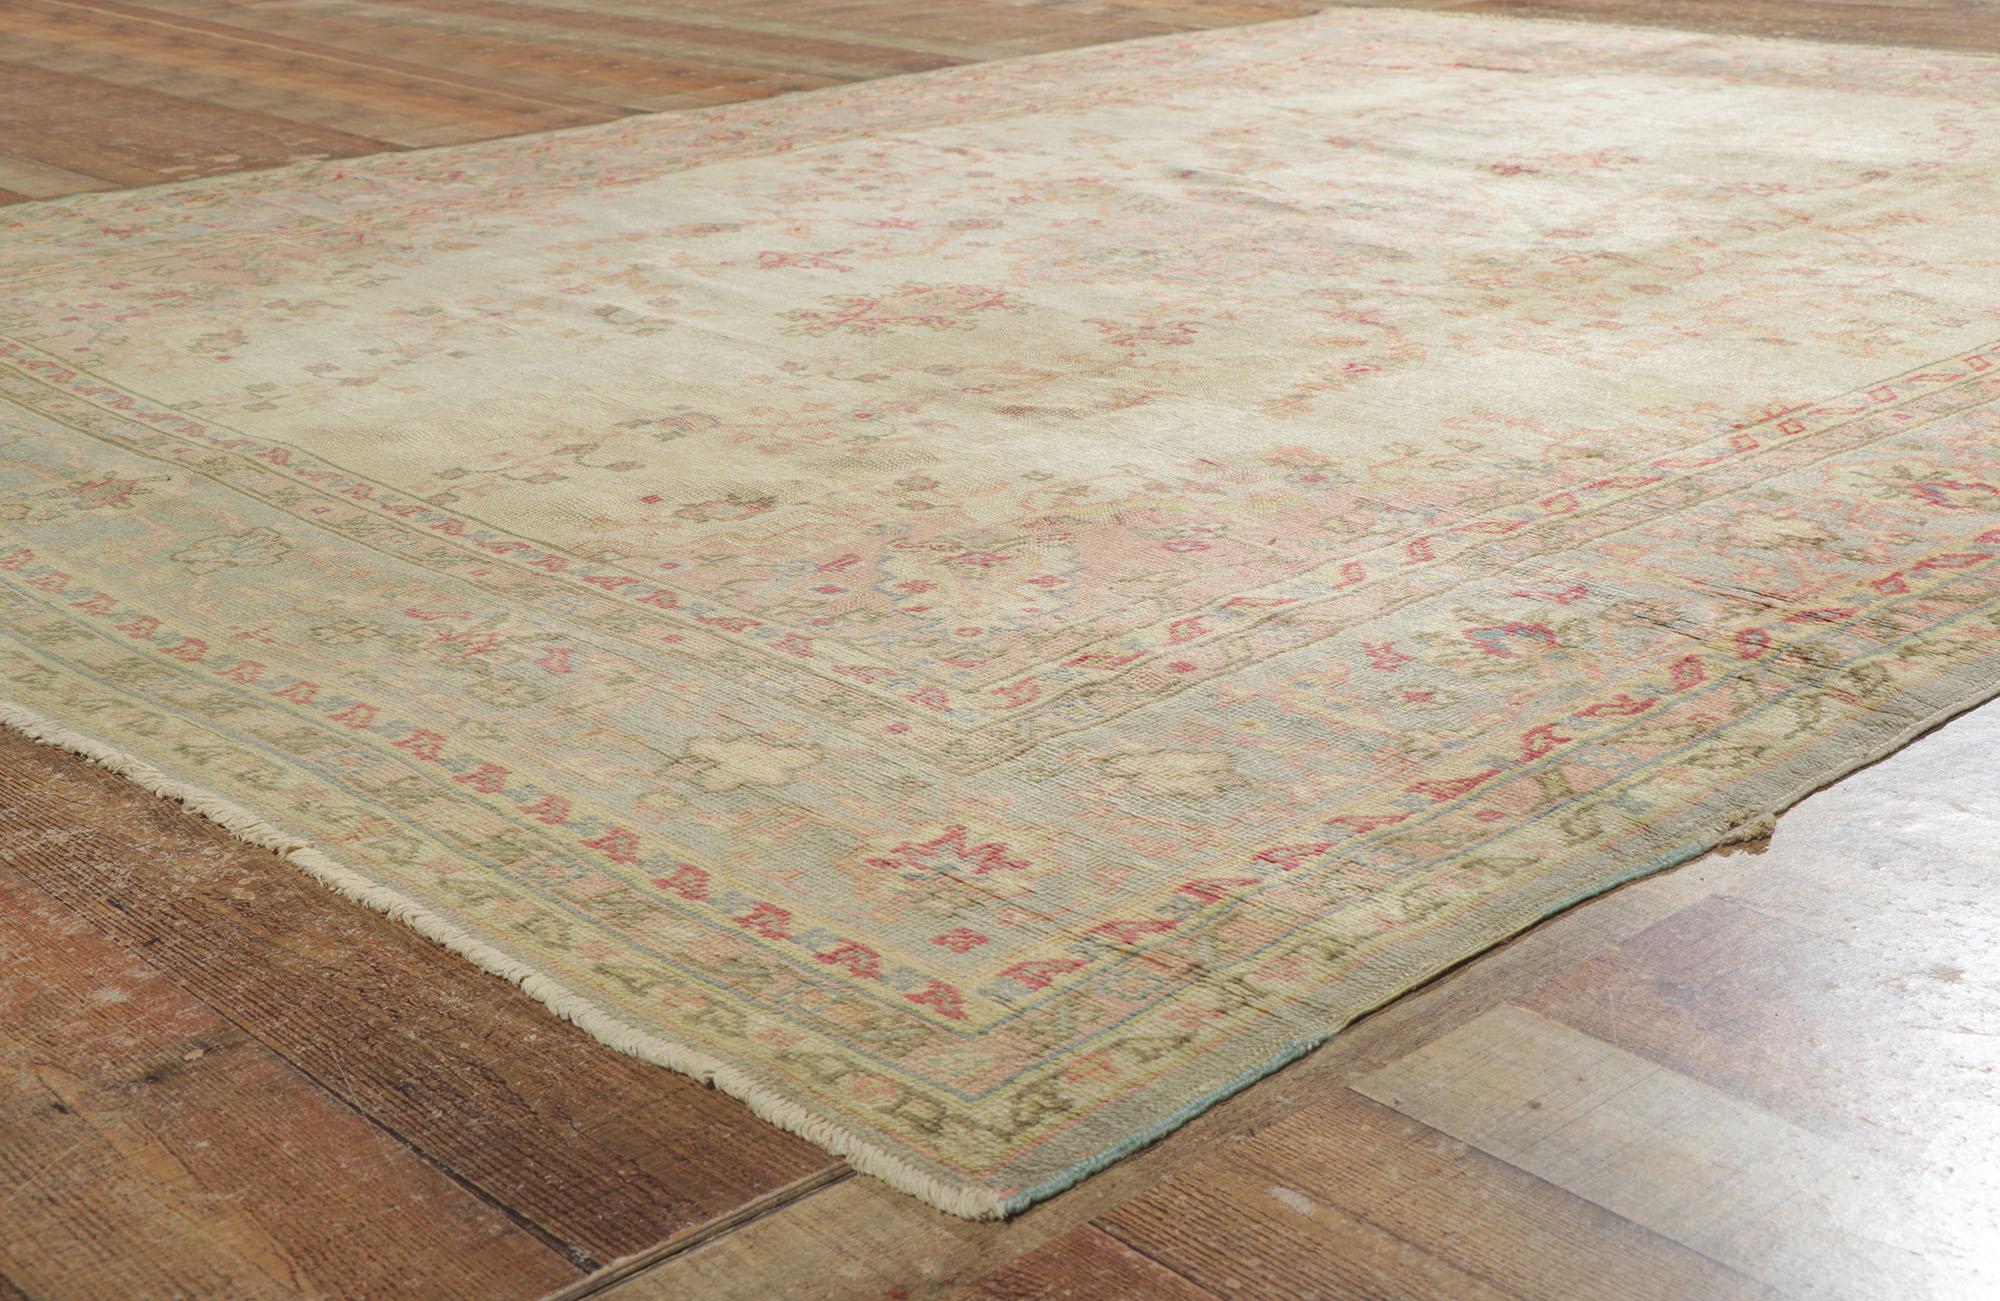 Wool Antique Turkish Oushak Rug, 8'06 x 10'10 For Sale